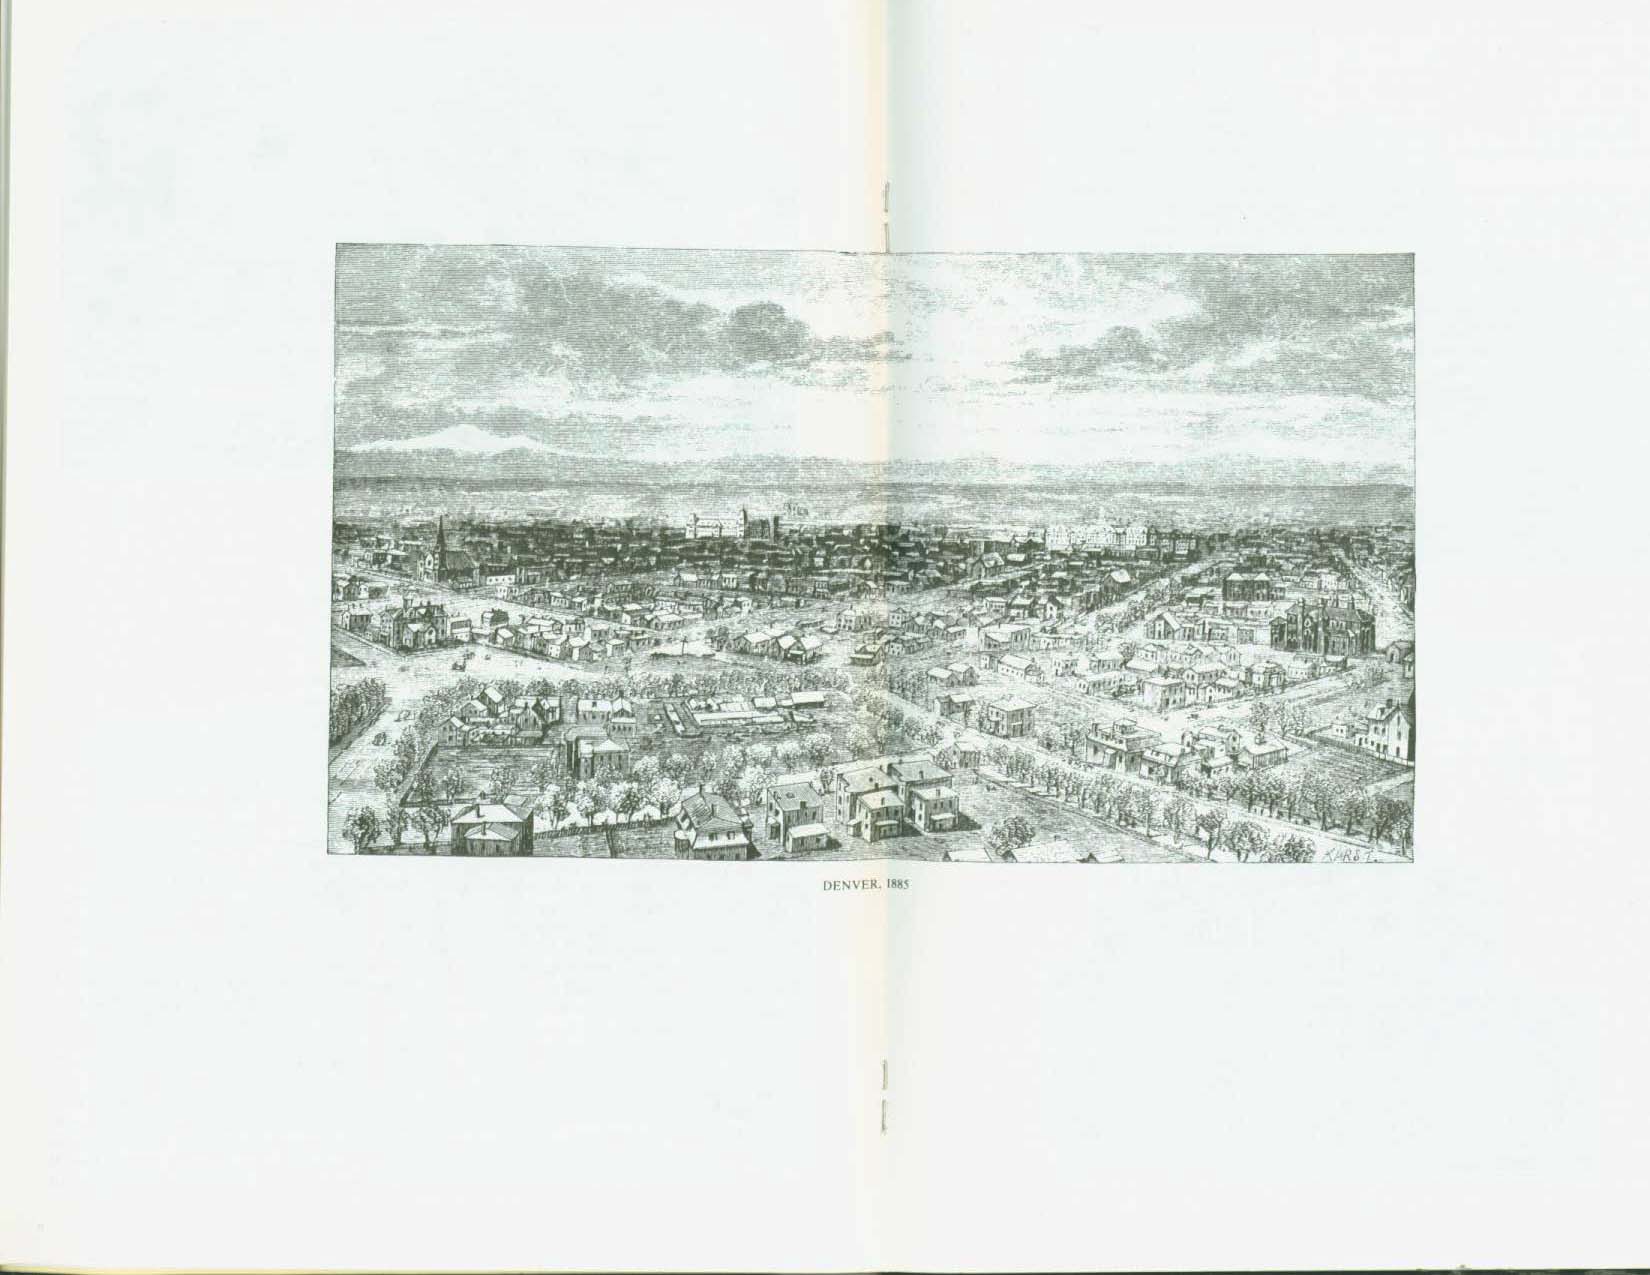 THE CITY OF DENVER, 1888: an early history of "The Queen City of the Plains". vist000h